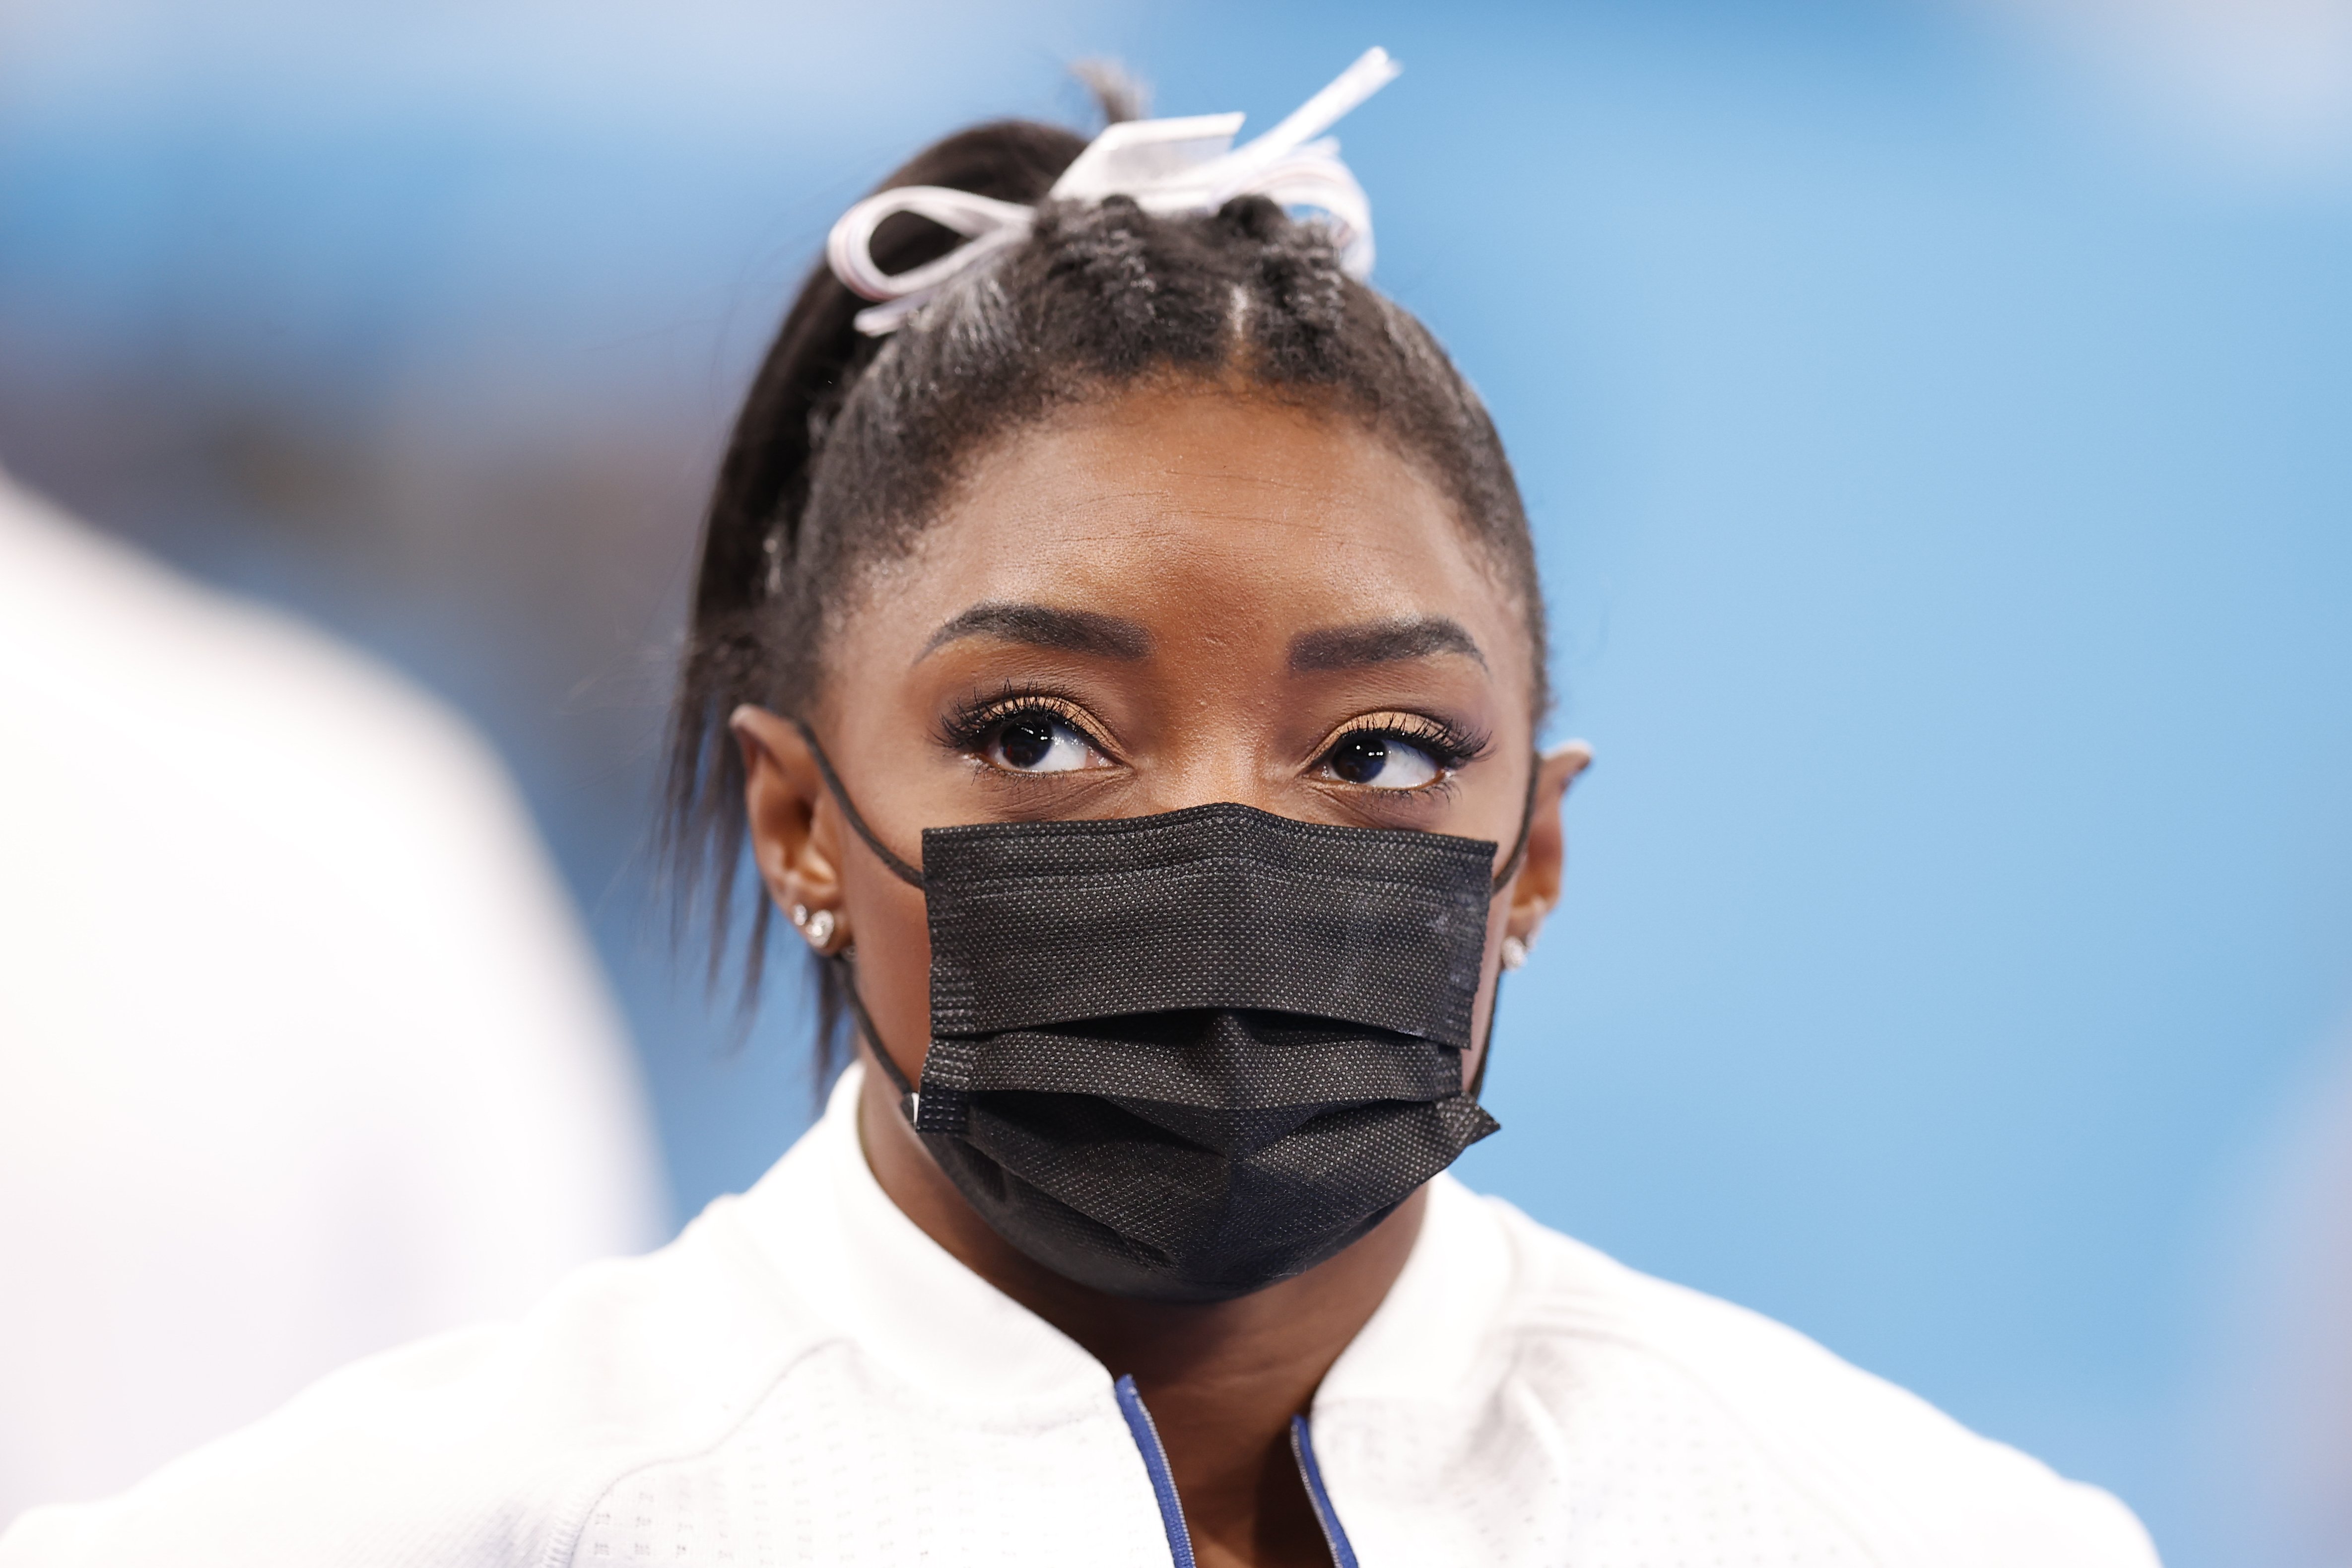 Simone Biles of Team United States looks on during the Women's Team Final on day four of the Tokyo 2020 Olympic Games at Ariake Gymnastics Centre on July 27, 2021 in Tokyo, Japan.| Source: Getty Images